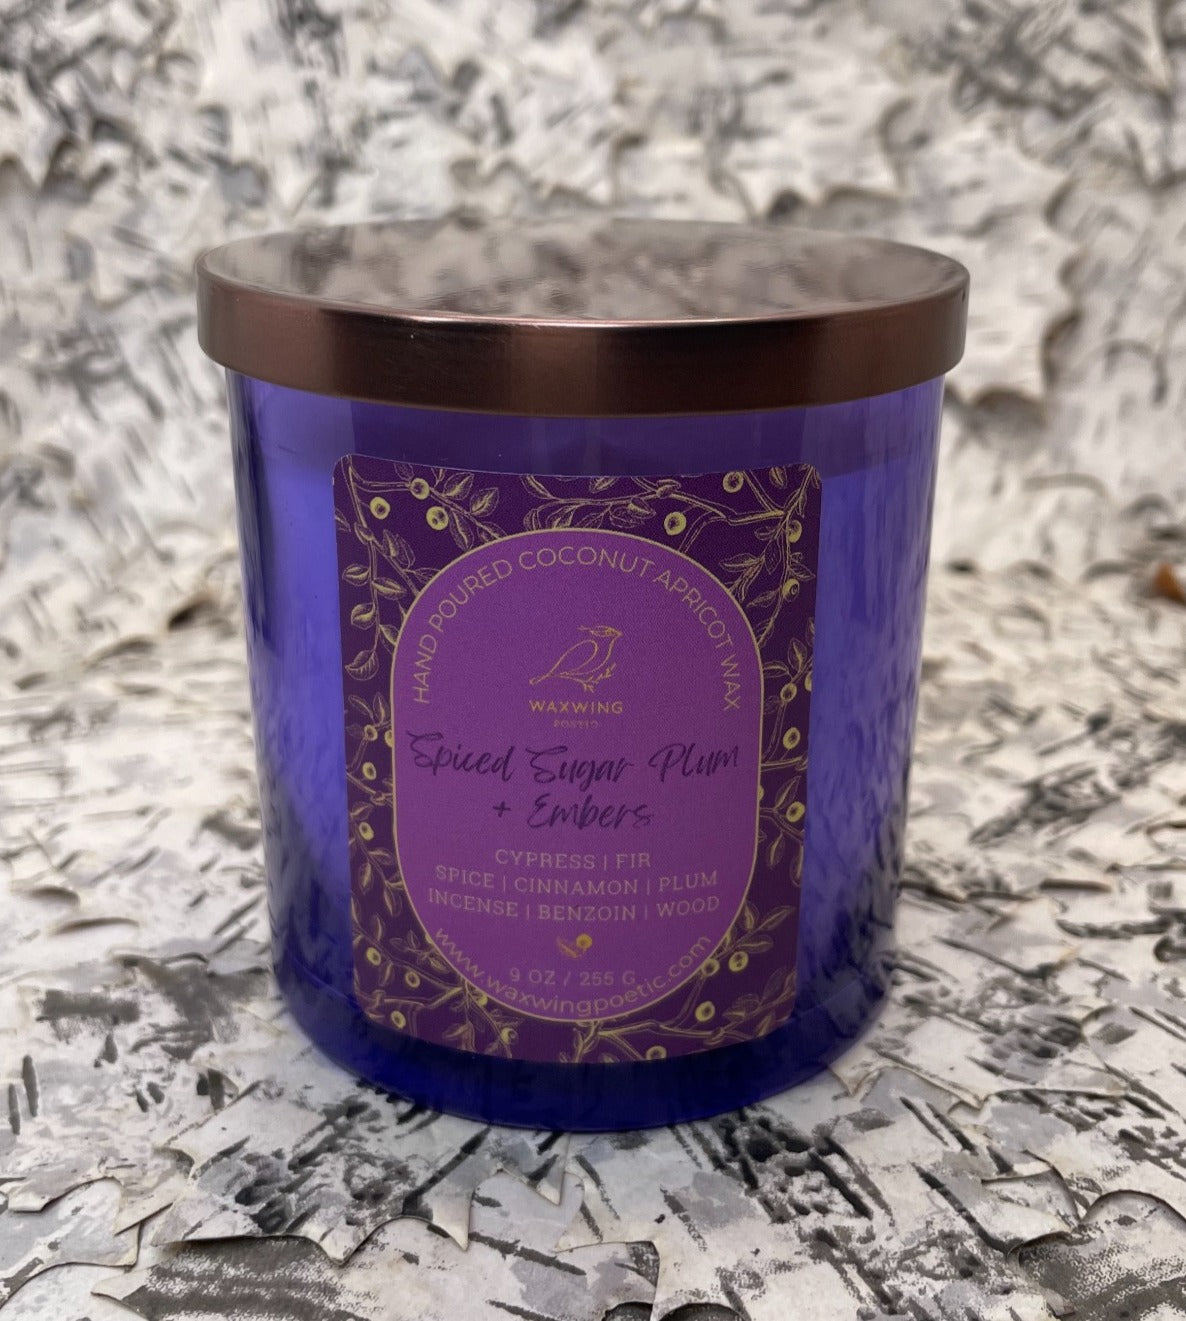 Spiced Sugar Plum + Embers | Coconut Apricot Wax Candle